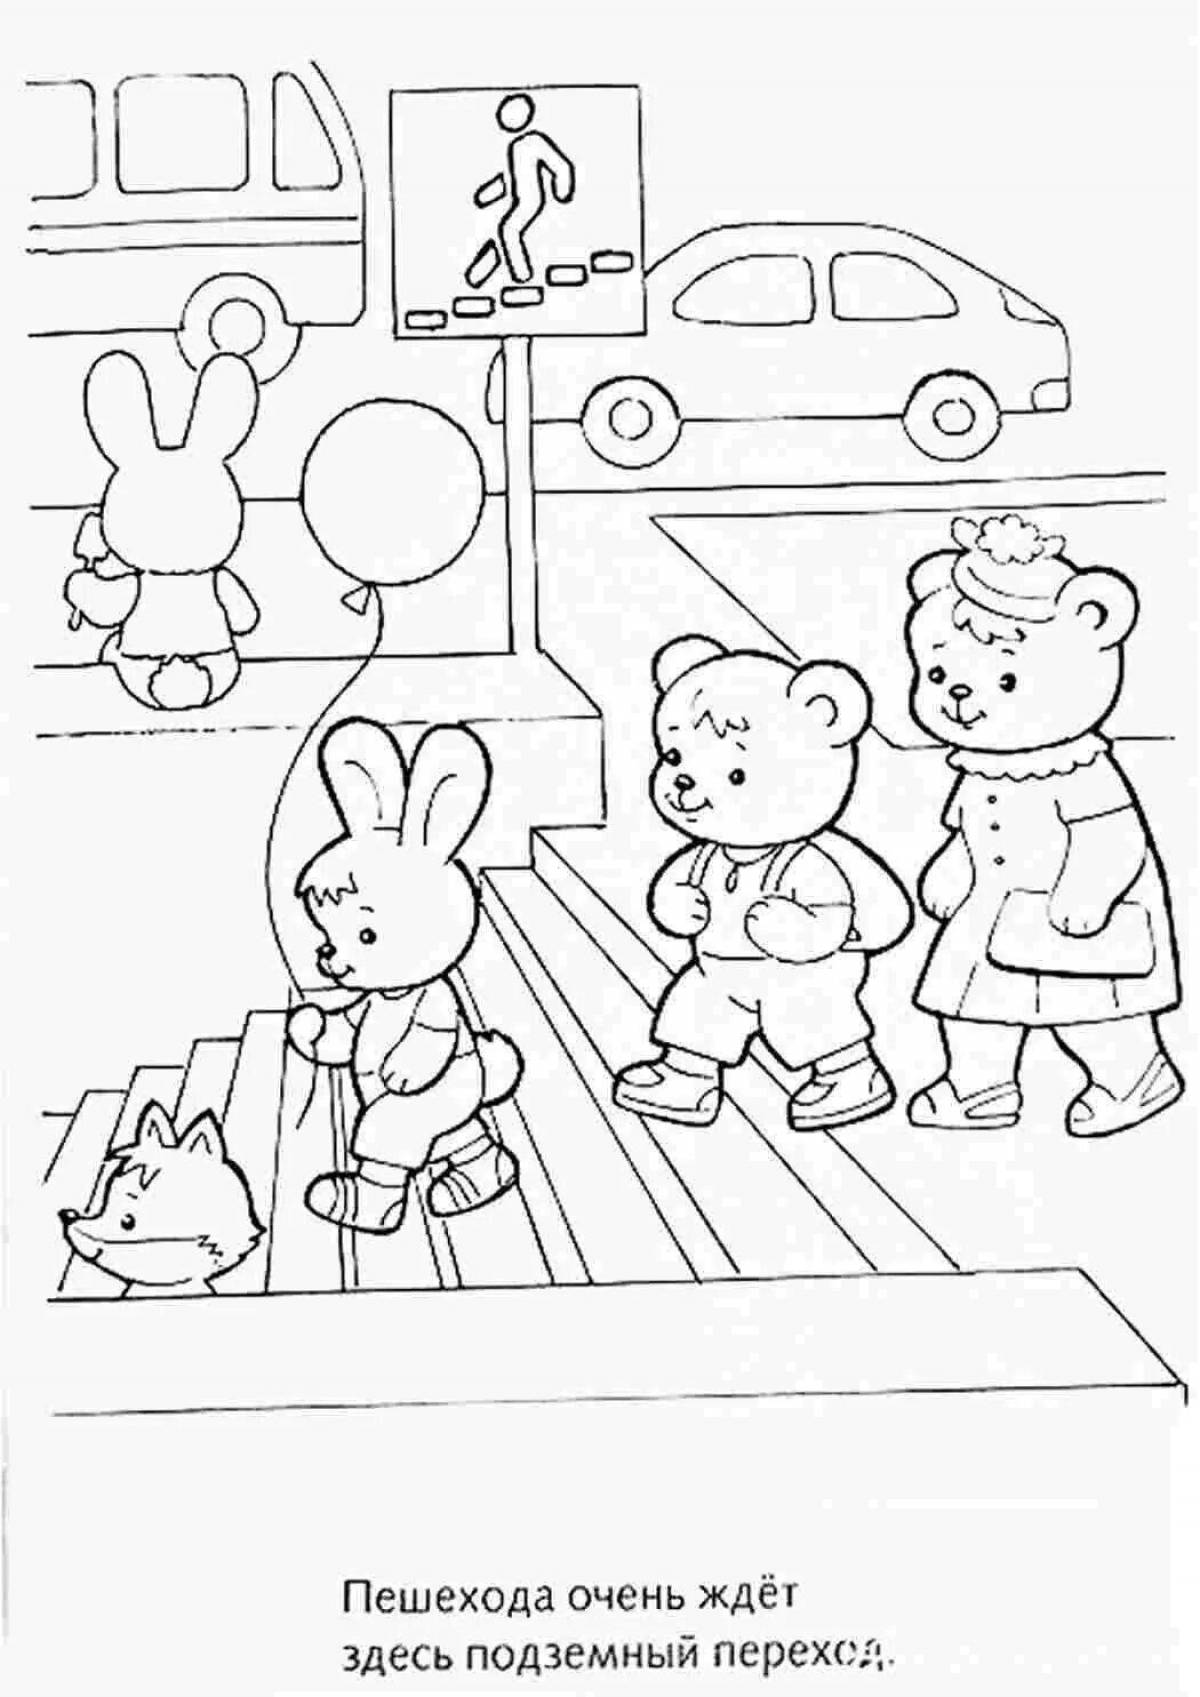 Colorful and Vibrant Safety Alphabet Coloring Page for Kids